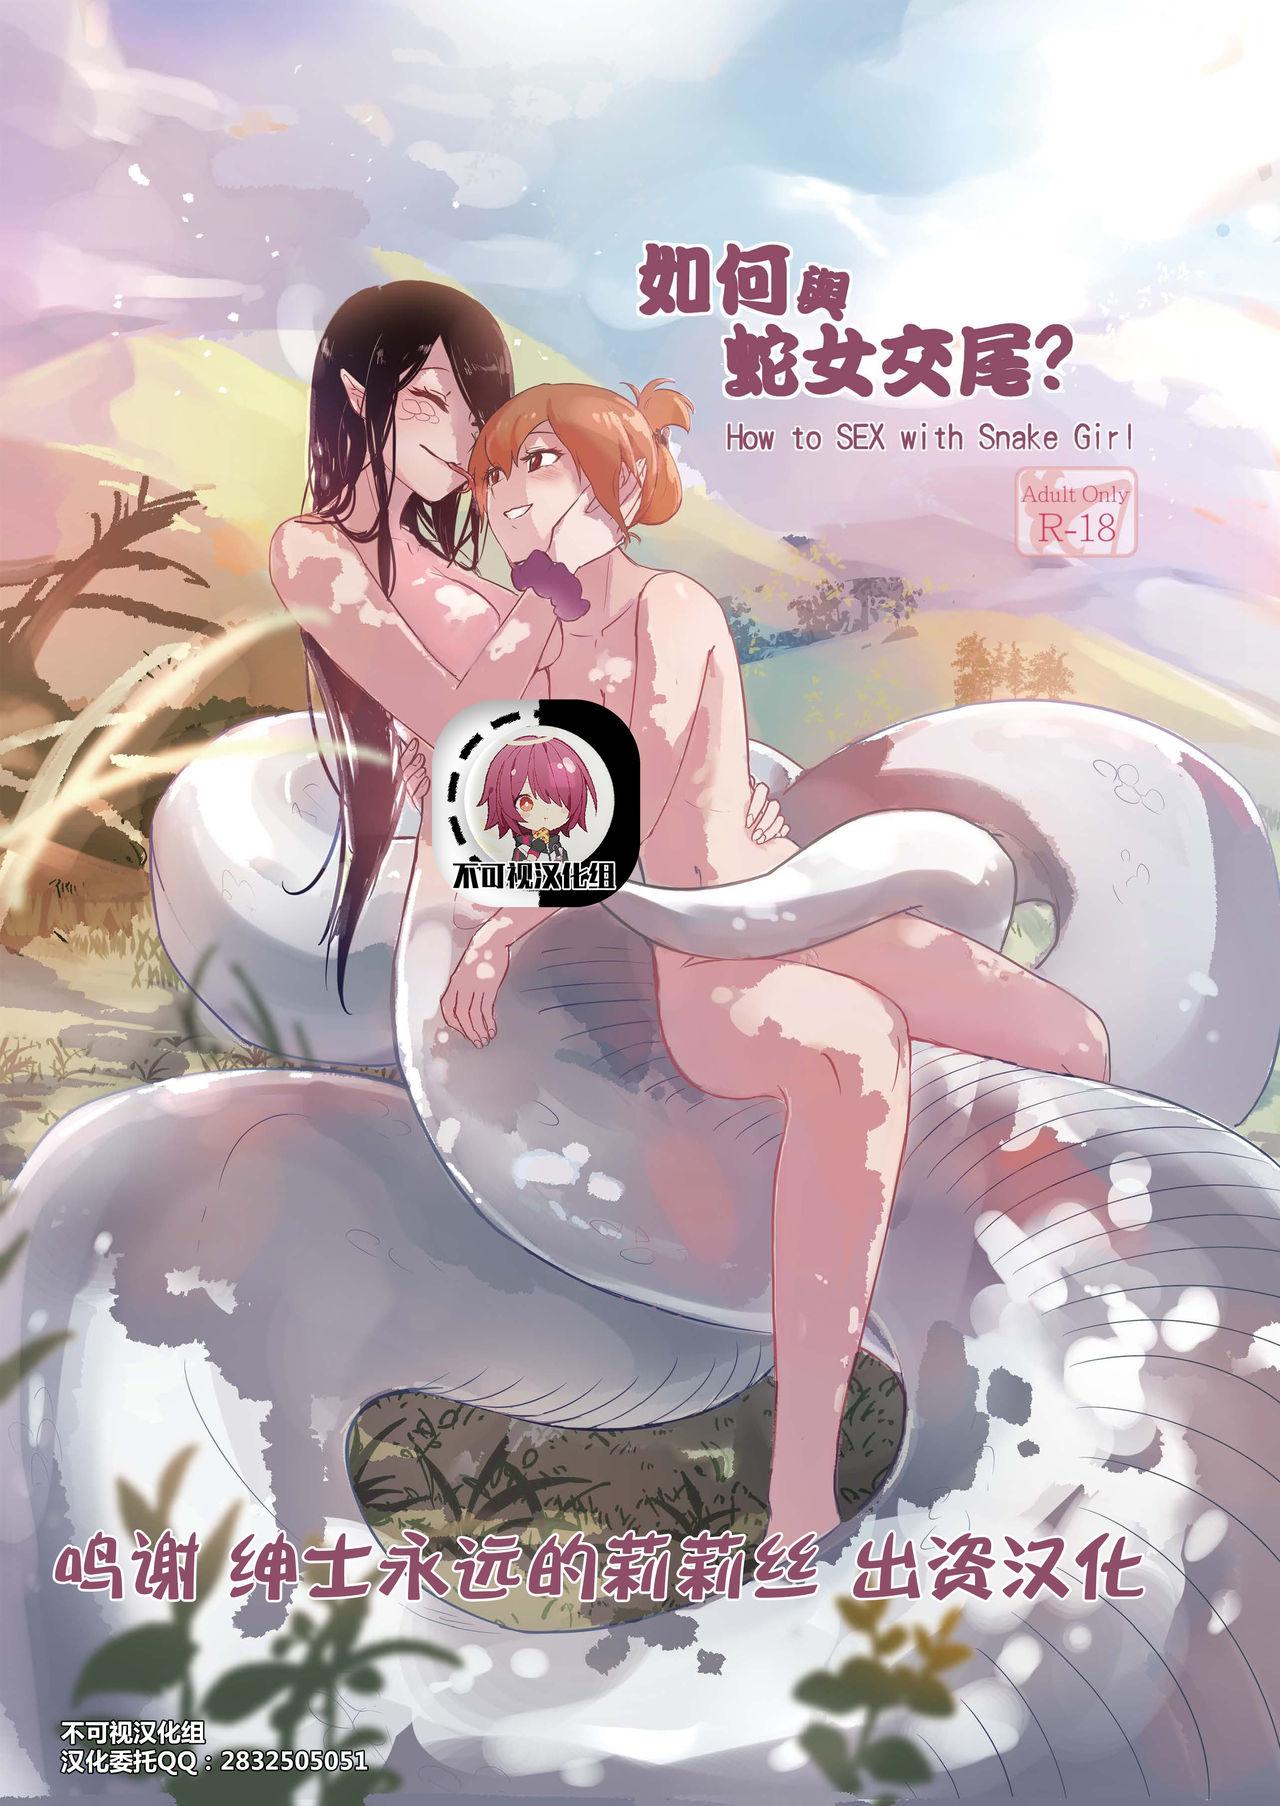 Class Room [Muzi (木子der百合聖地)] How to Sex with Snake Girl | 如何與蛇女交尾 | 蛇女と交尾する方法は[Chinese]【不可视汉化】 - Original Jerk Off - Picture 1